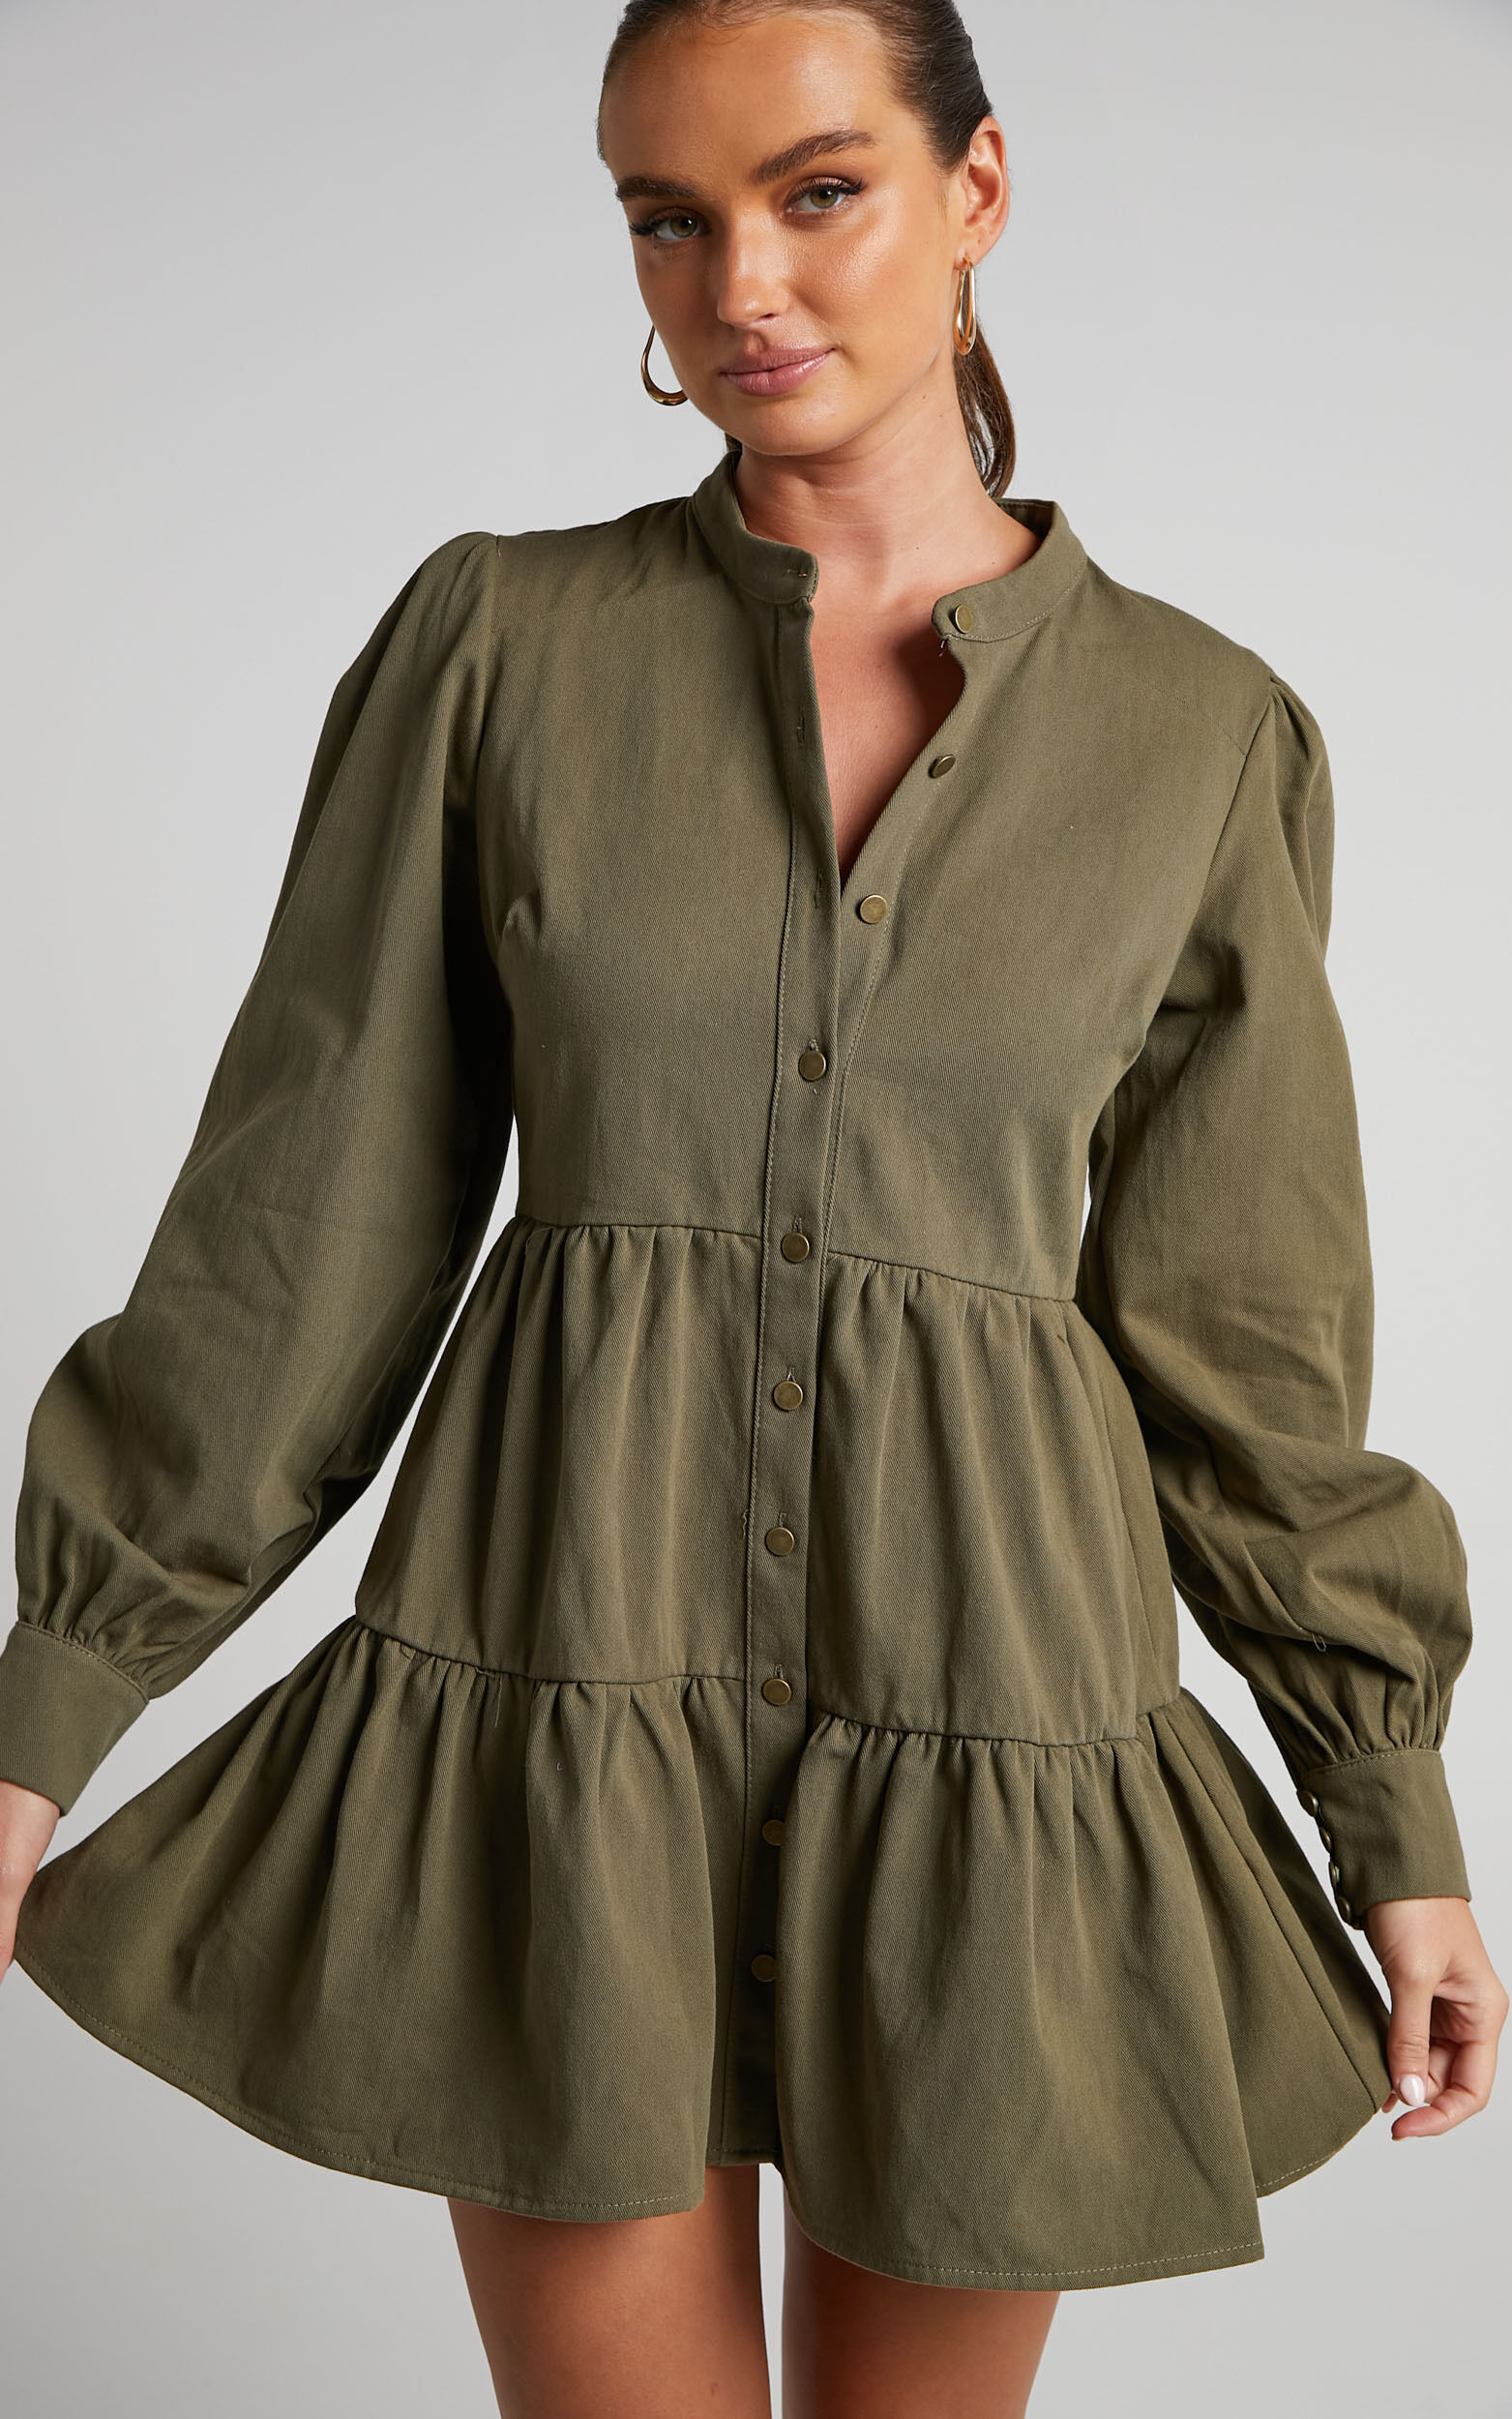 Alesana Mini Dress - Long Sleeve Button Through Tiered Shirt Smock Dress in Khaki - 06, GRN1, super-hi-res image number null